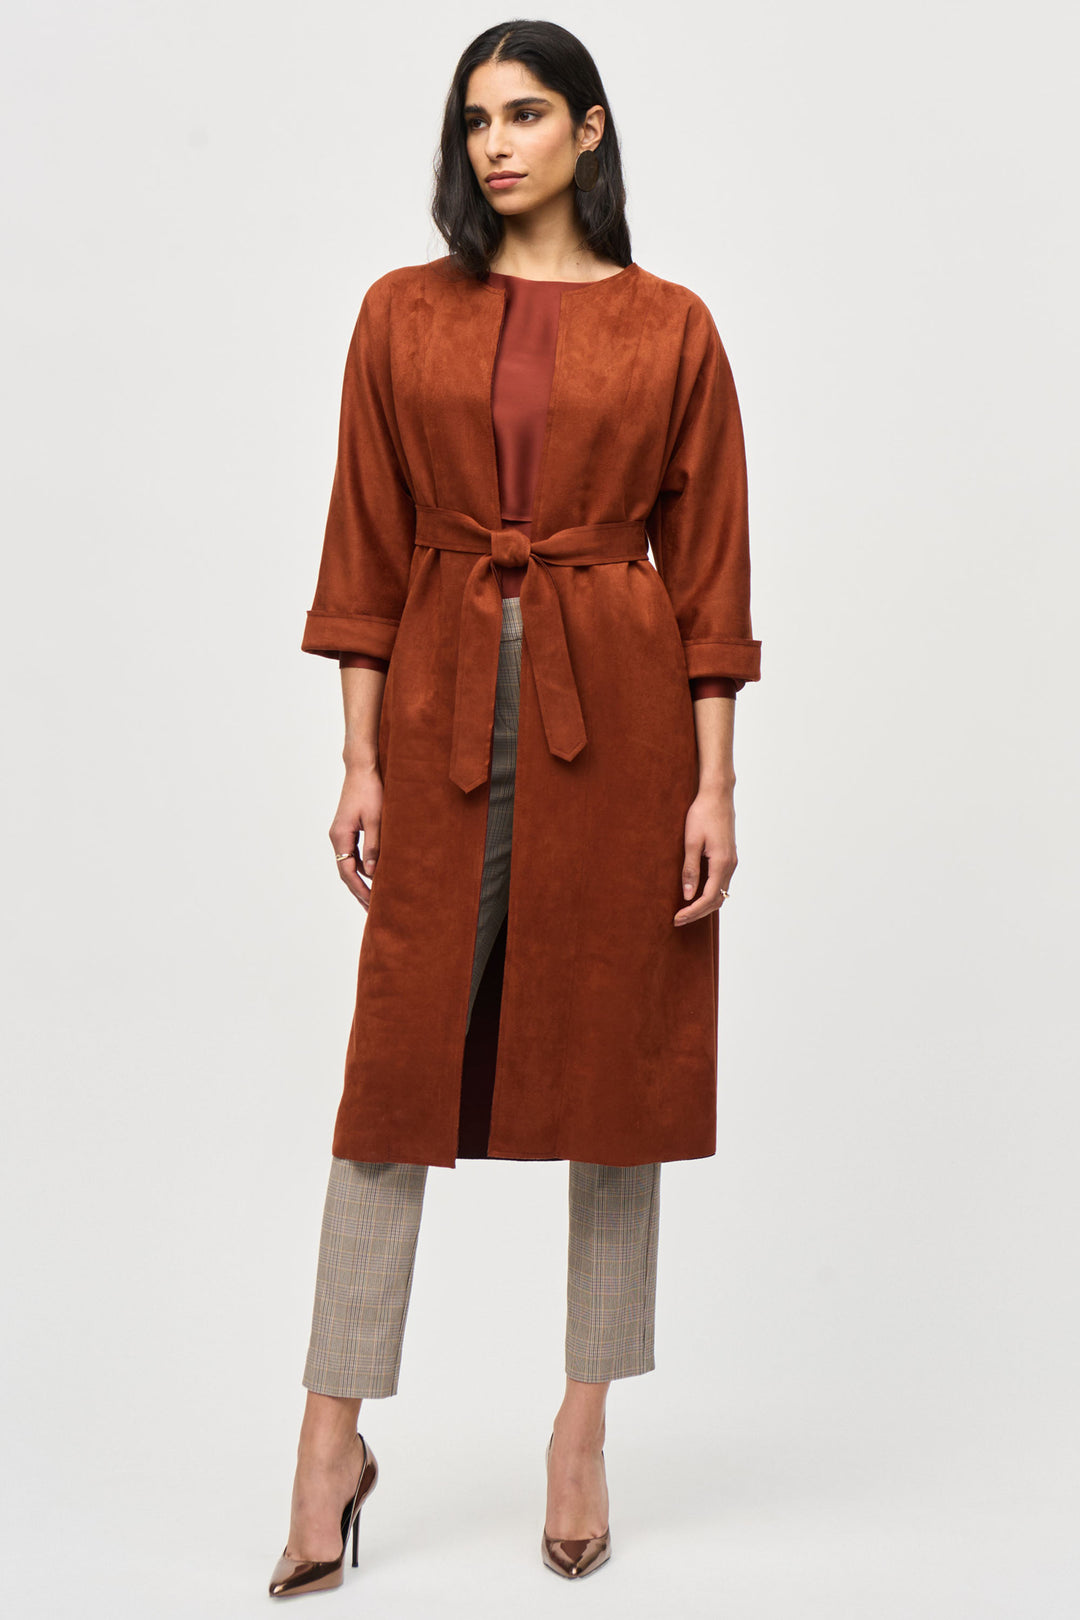 Joseph Ribkoff Fall 2024  The solid colour, plain pattern, collarless design and open front style give this ultra-modern piece a timeless elegance, while the practical side pockets add functionality. 